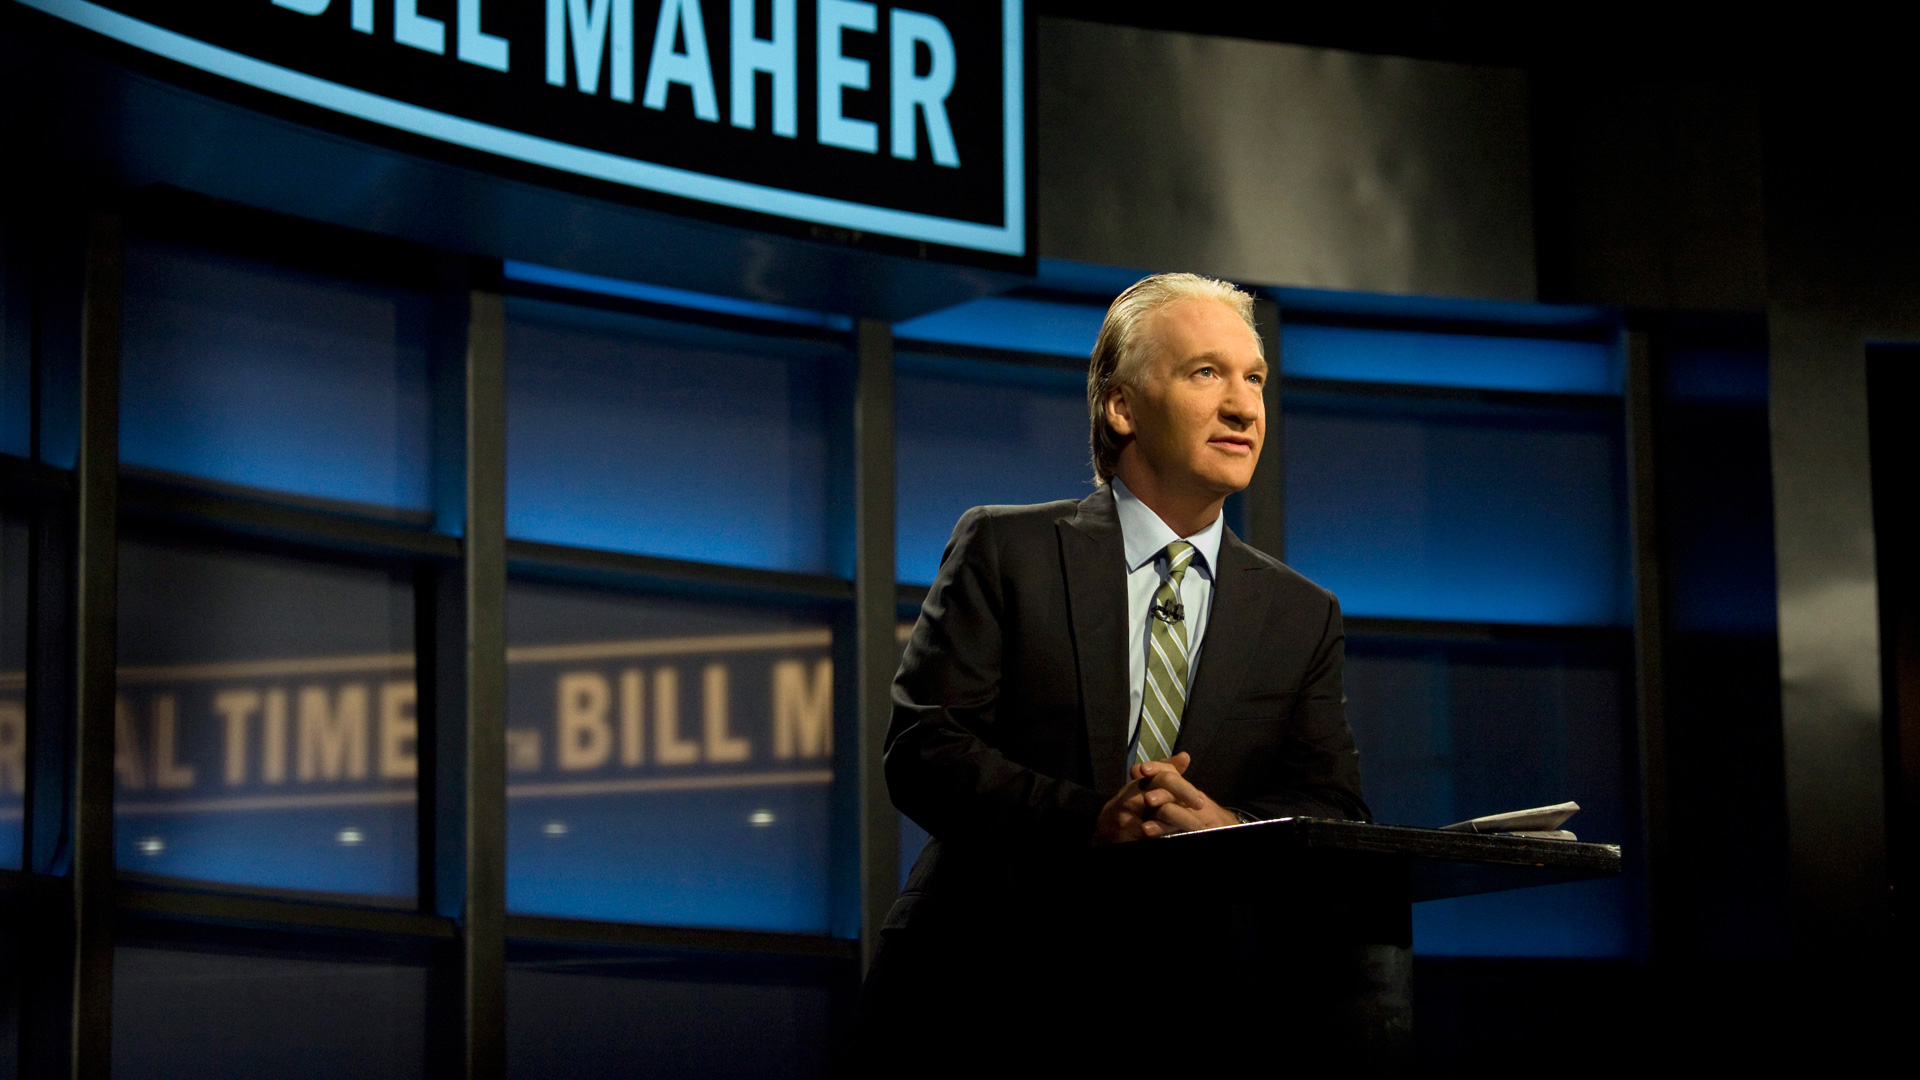 Real Time with Bill Maher: Season 16 Kicks Off This Friday on HBO ...